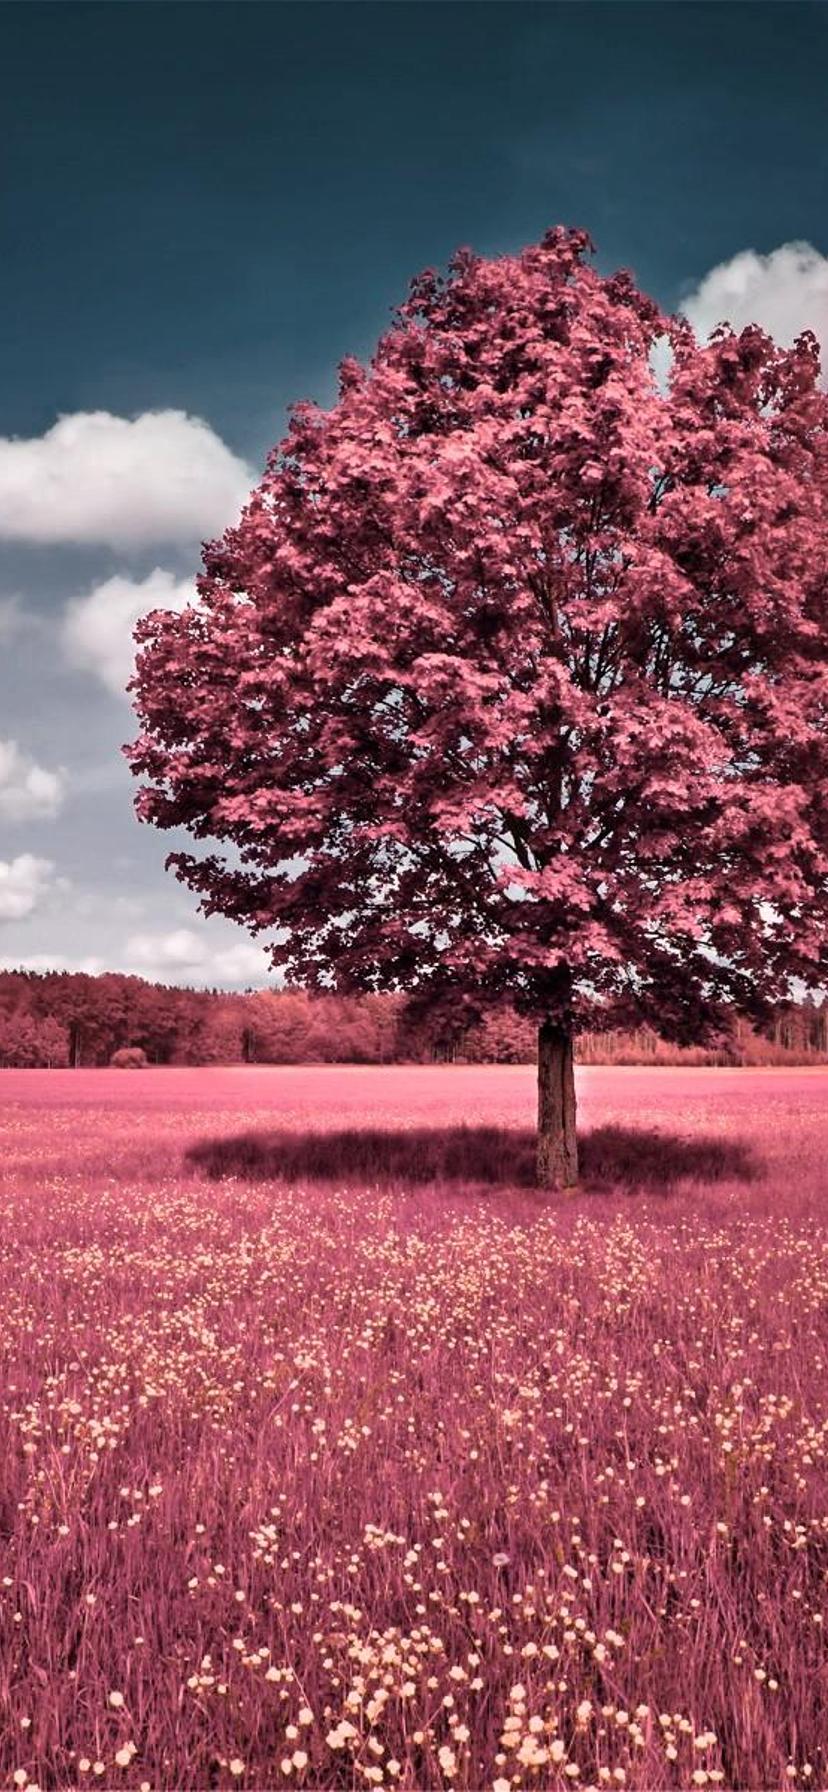 Red nature single tree in a wonderful field